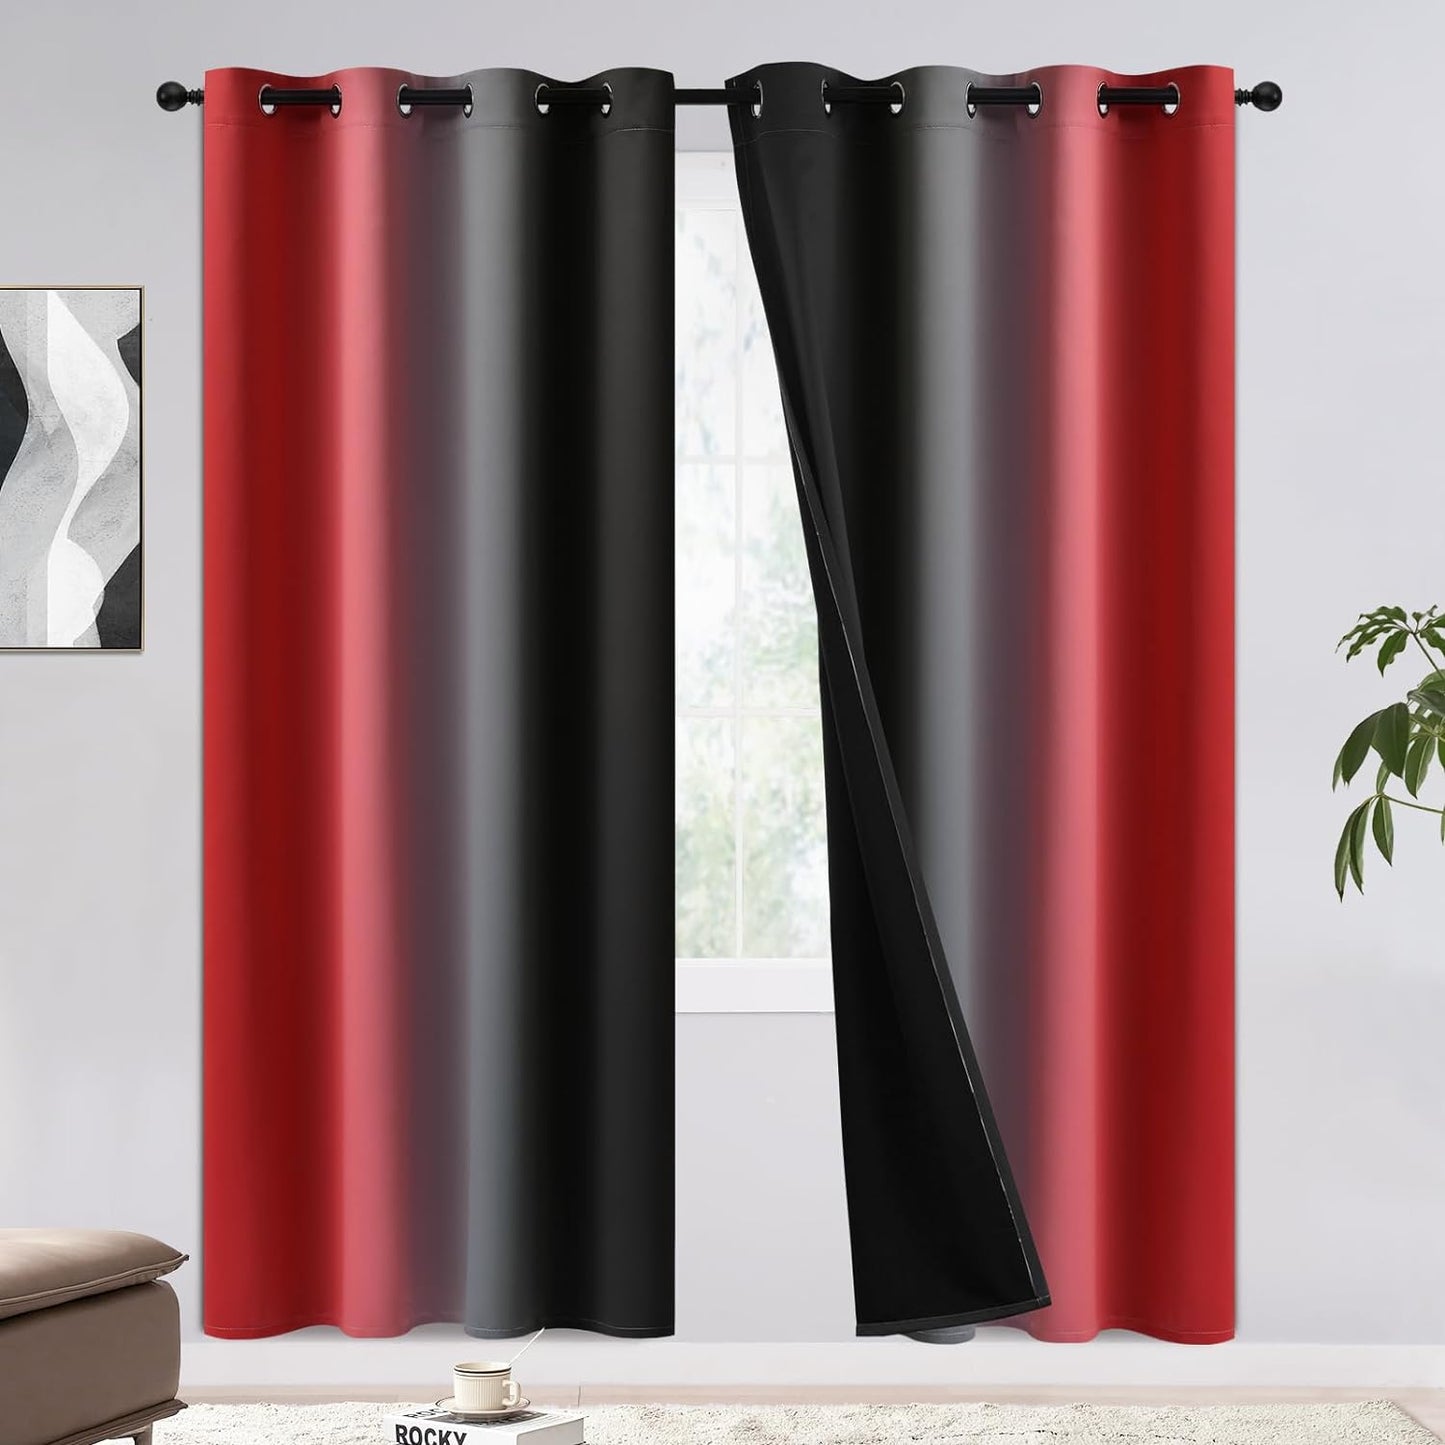 COSVIYA 100% Blackout Curtains & Drapes Ombre Purple Curtains 63 Inch Length 2 Panels,Full Room Darkening Grommet Gradient Insulated Thermal Window Curtains for Bedroom/Living Room,52X63 Inches  COSVIYA Blackout Red And Black 52W X 72L 